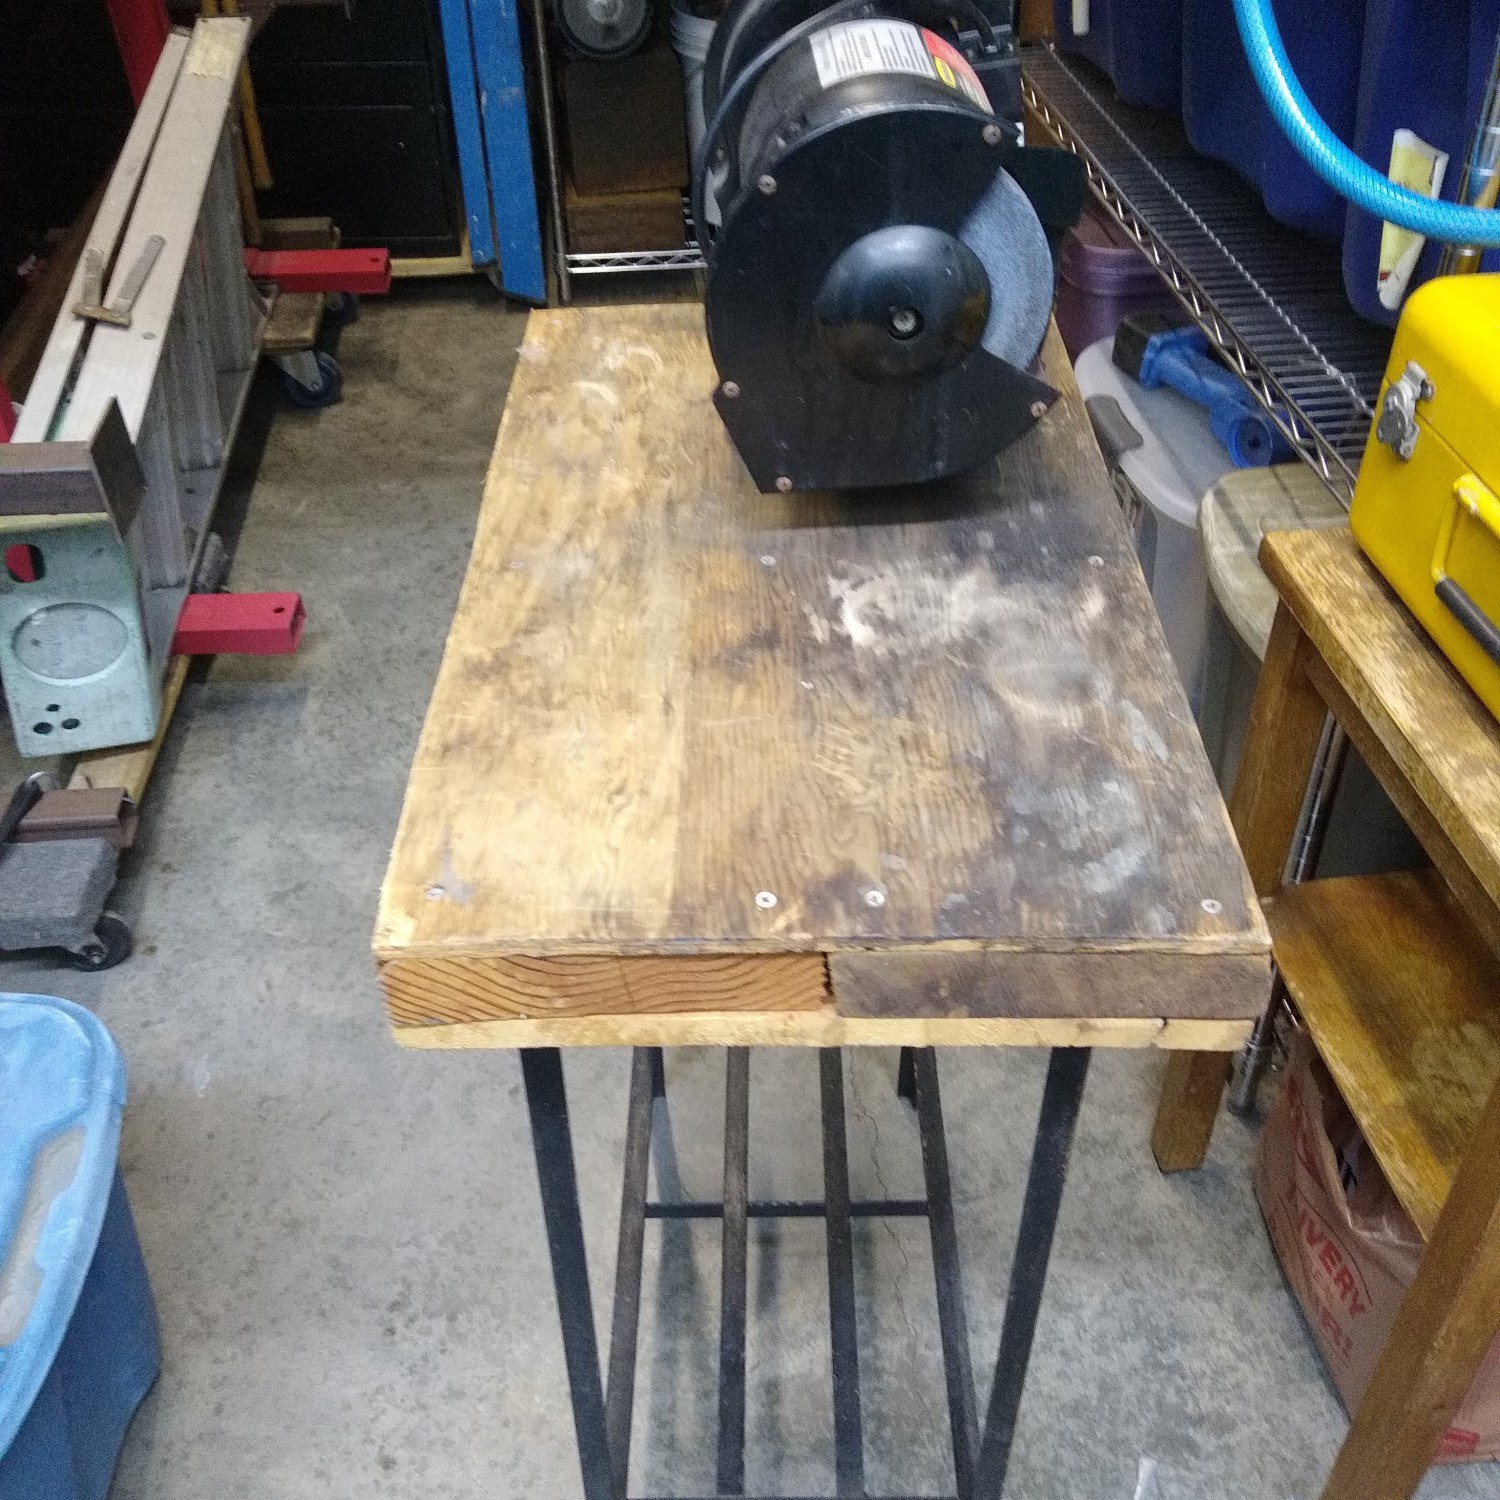 Bench grinder mounted on small table.